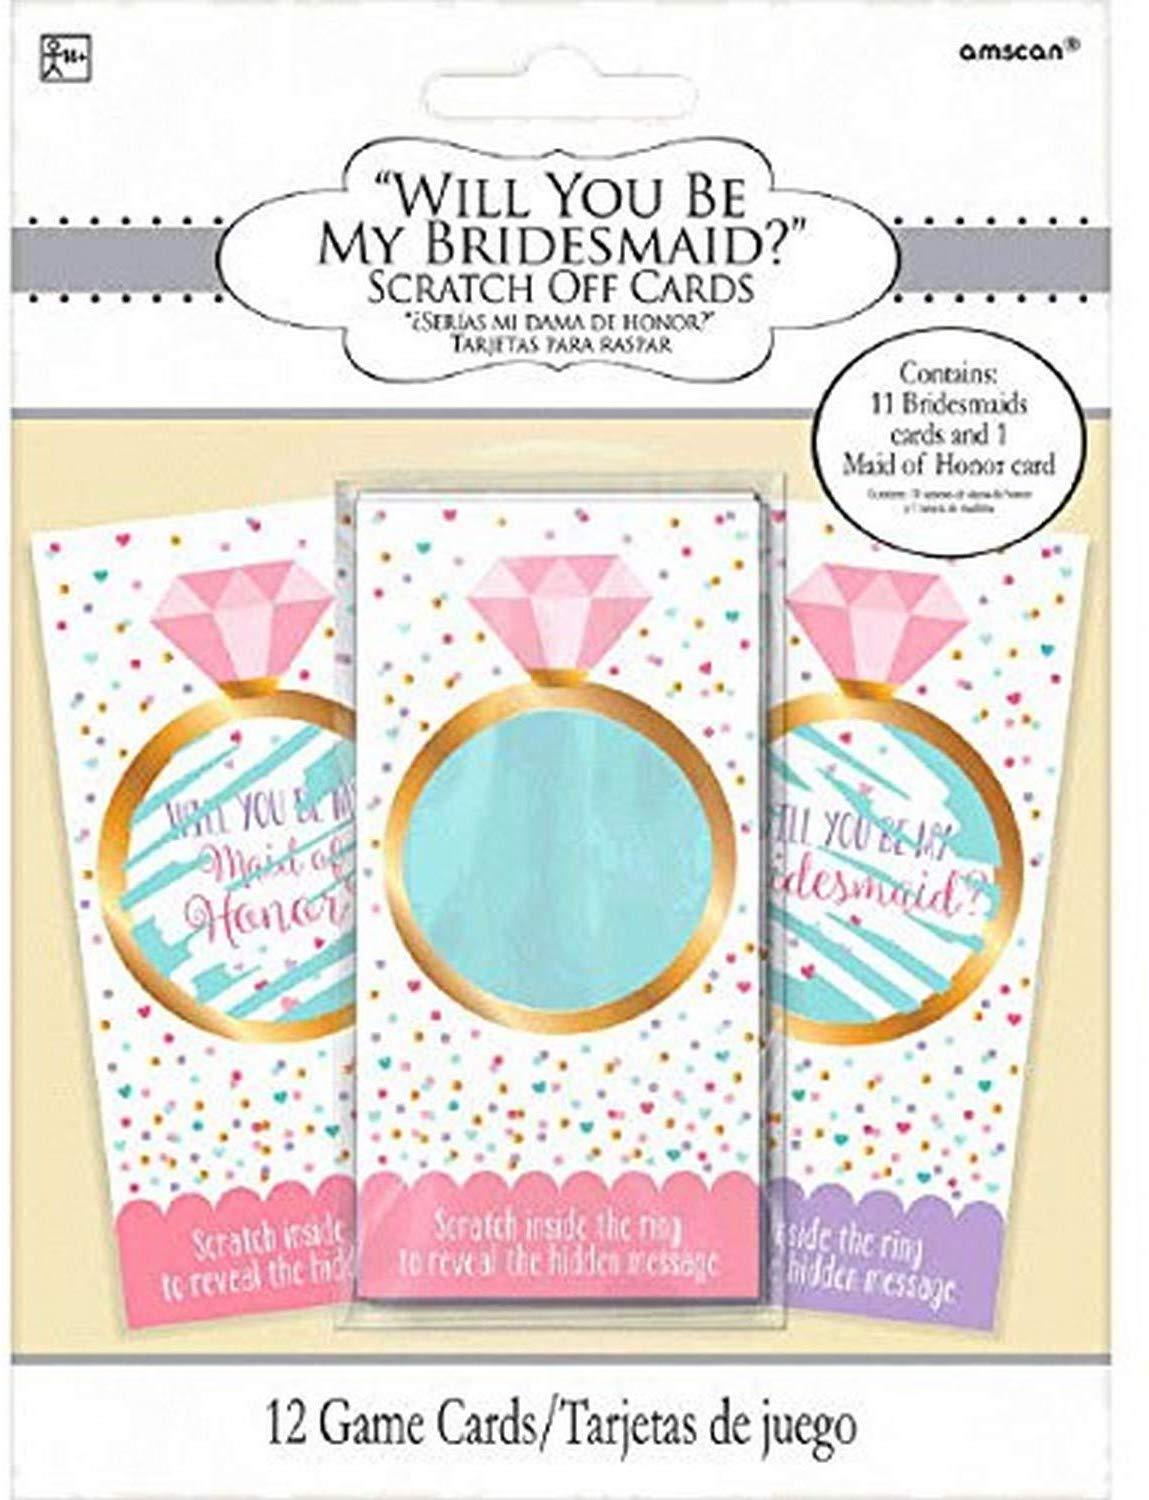 Will you be my Bridesmaid? Cards Unique Party Supplies NZ